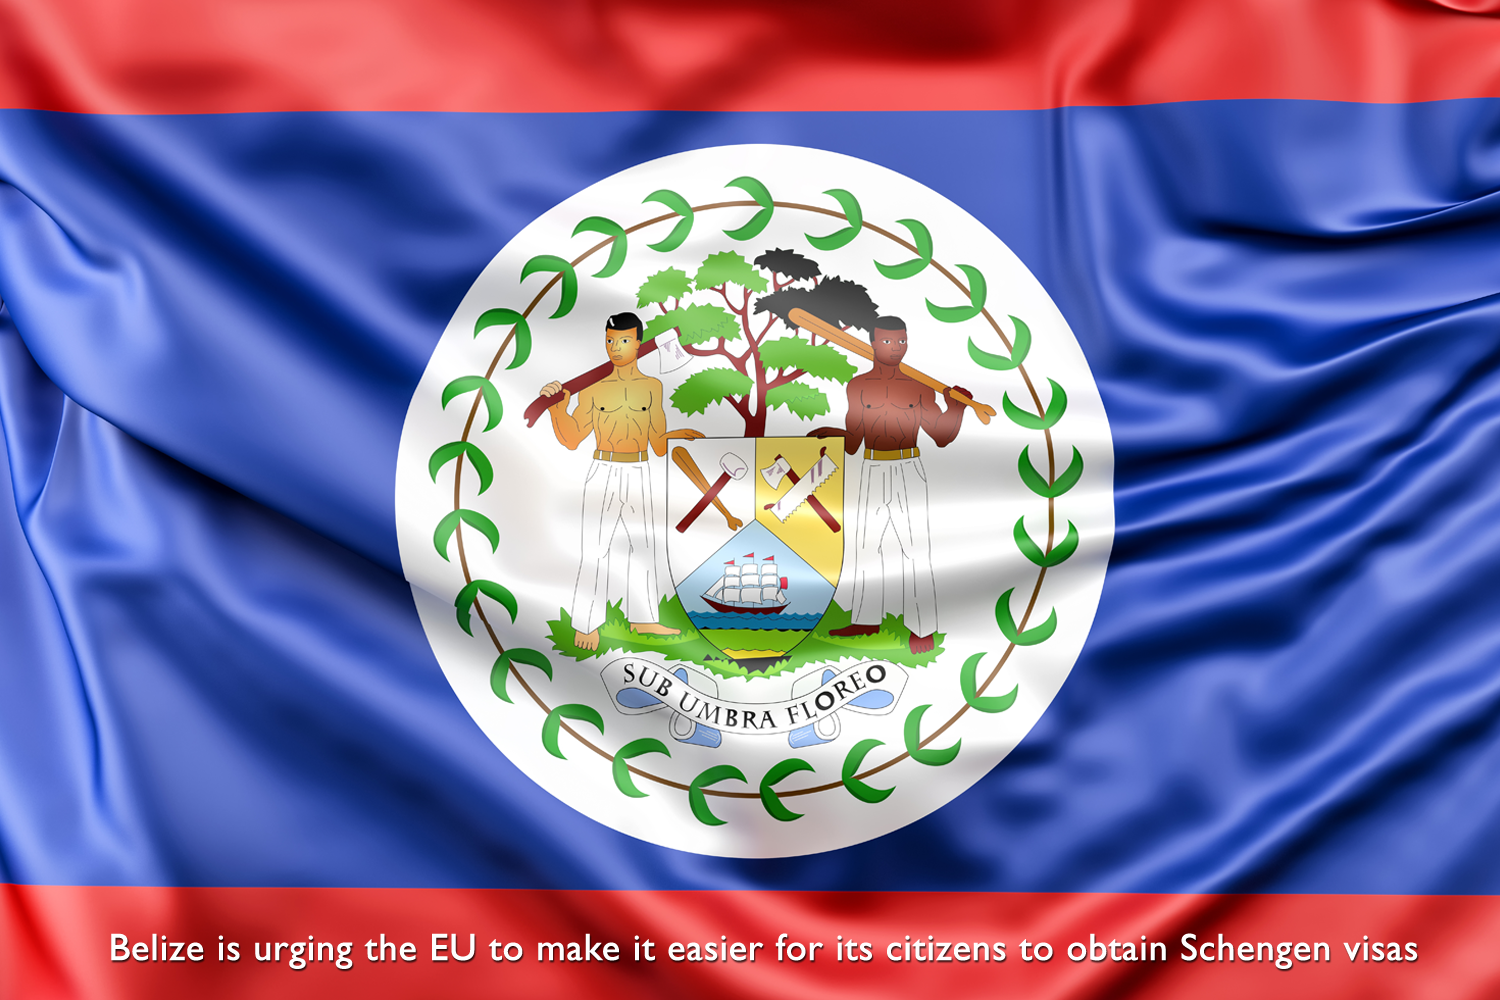 Belize is urging the EU to make it easier for its citizens to obtain Schengen visas.